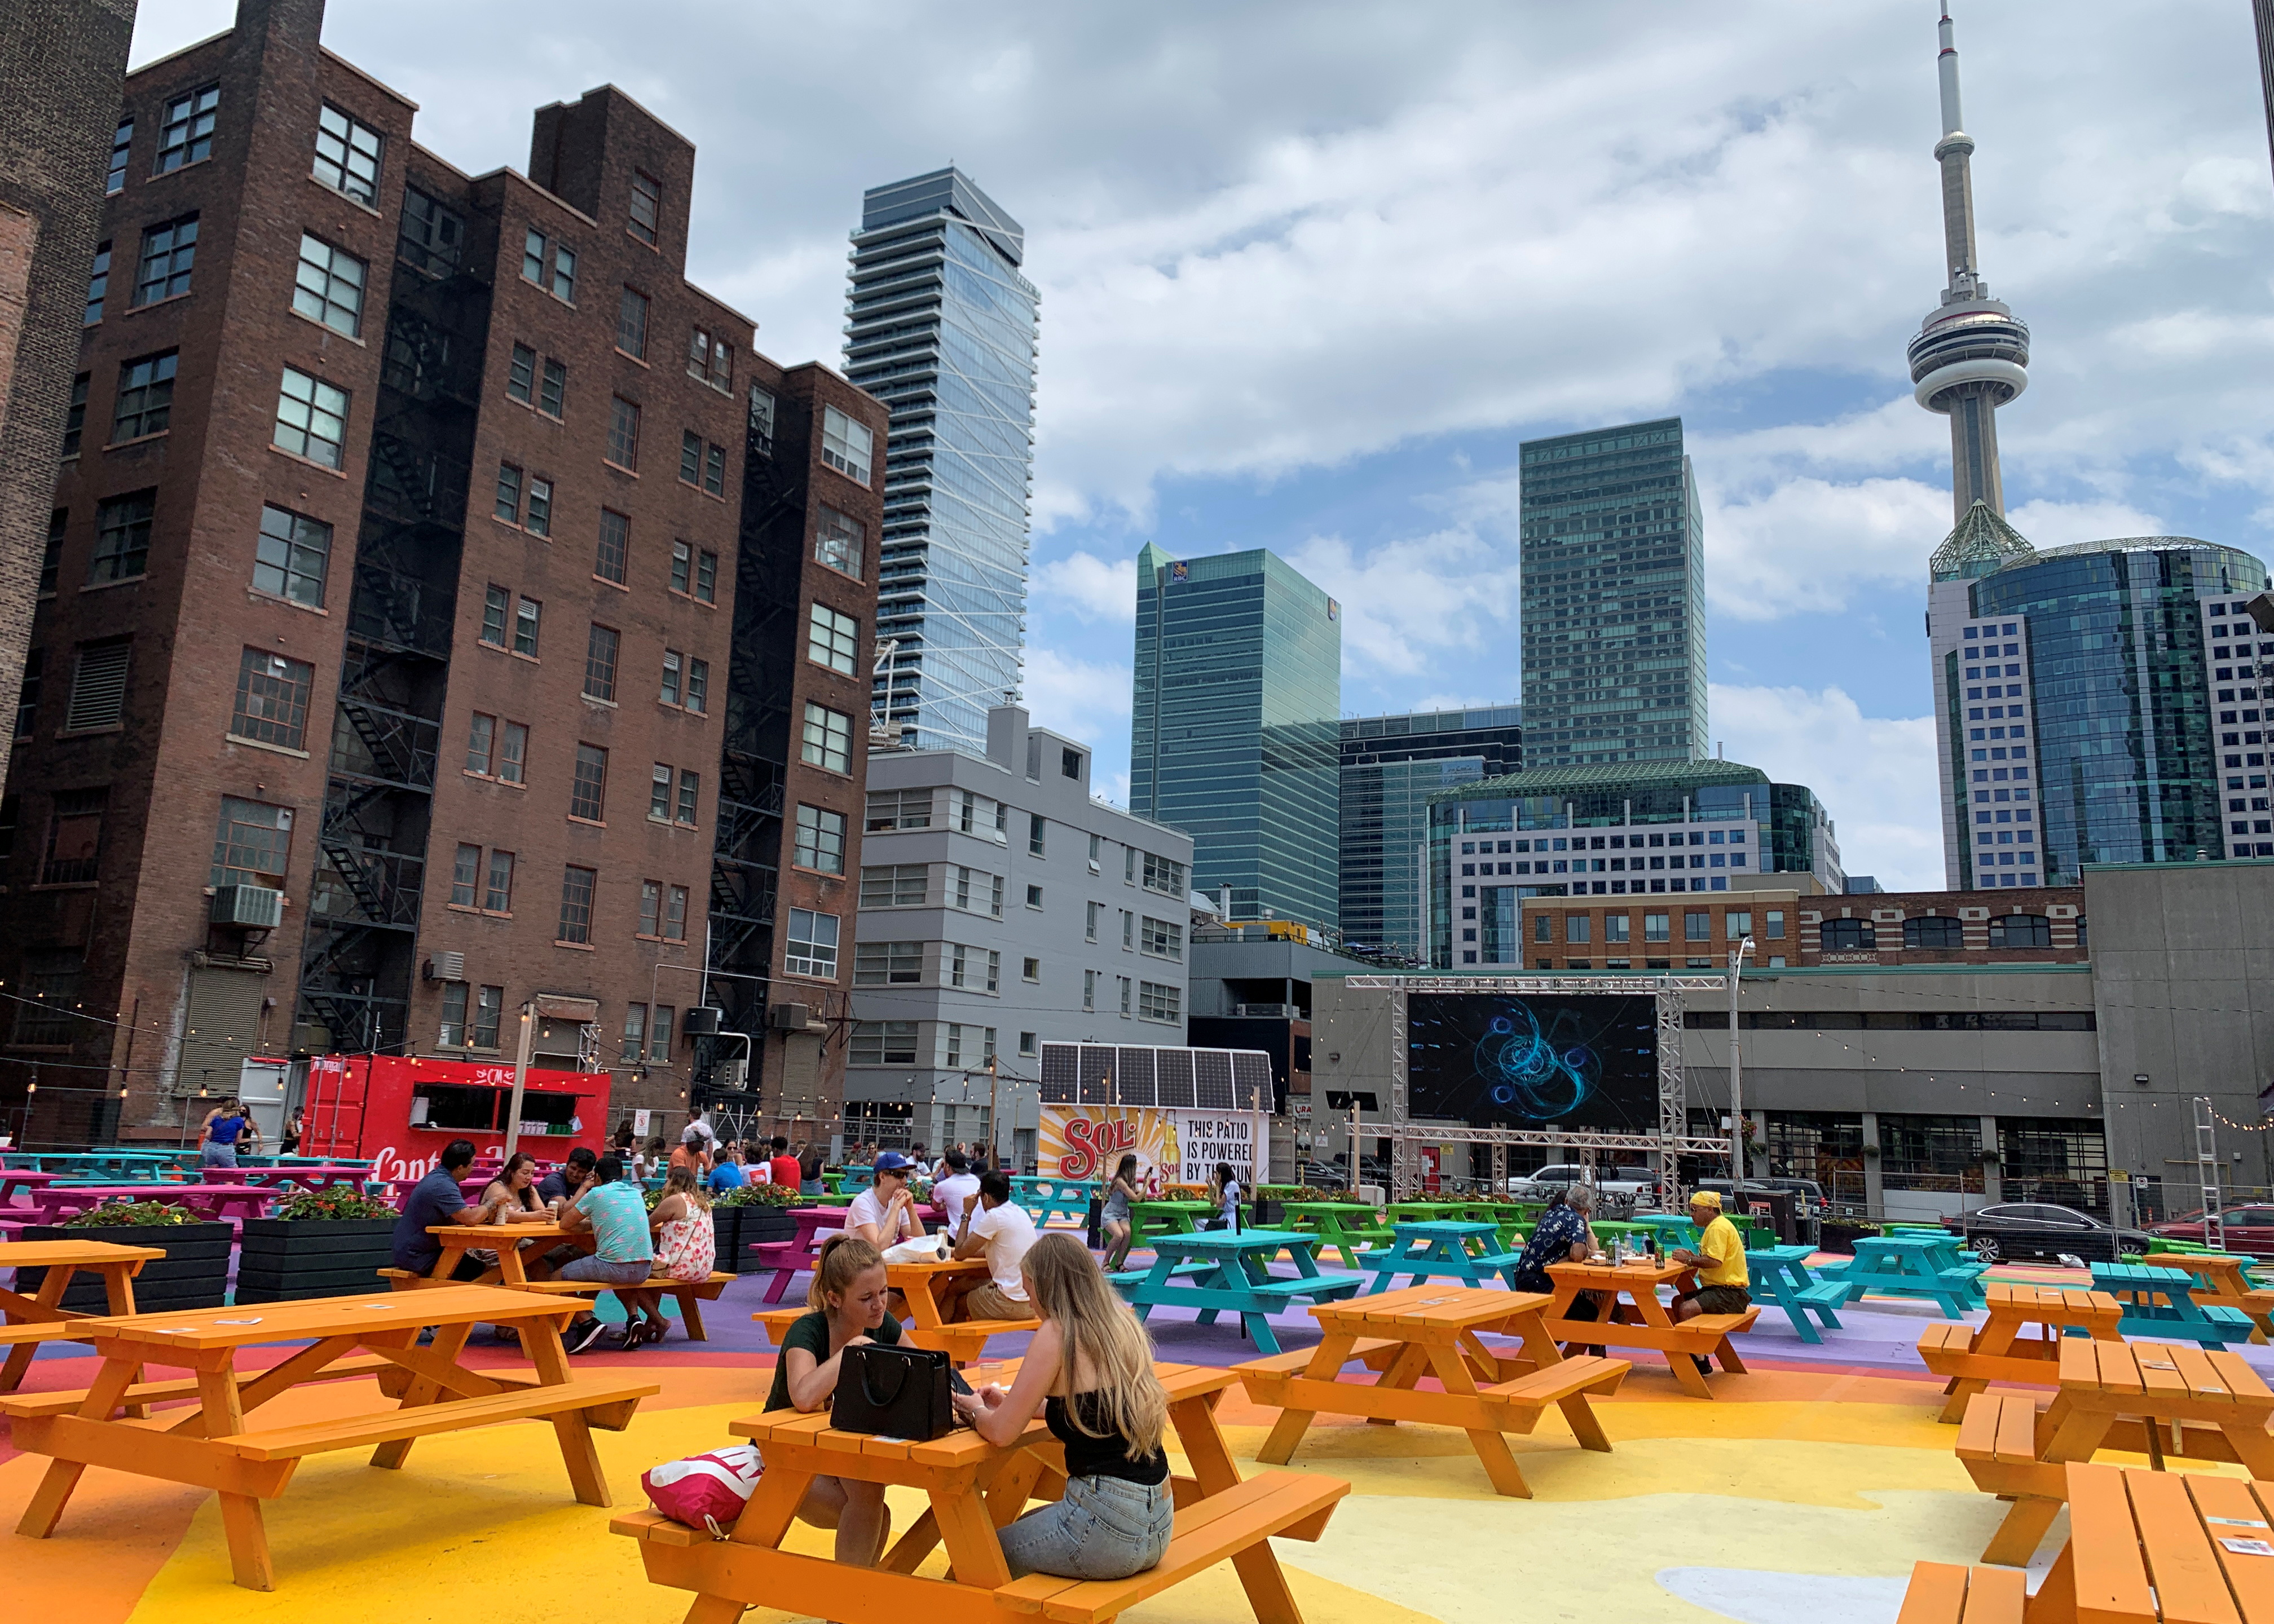 People sit at multi-coloured picnic tables in the RendezViews outdoor patio project in Toronto